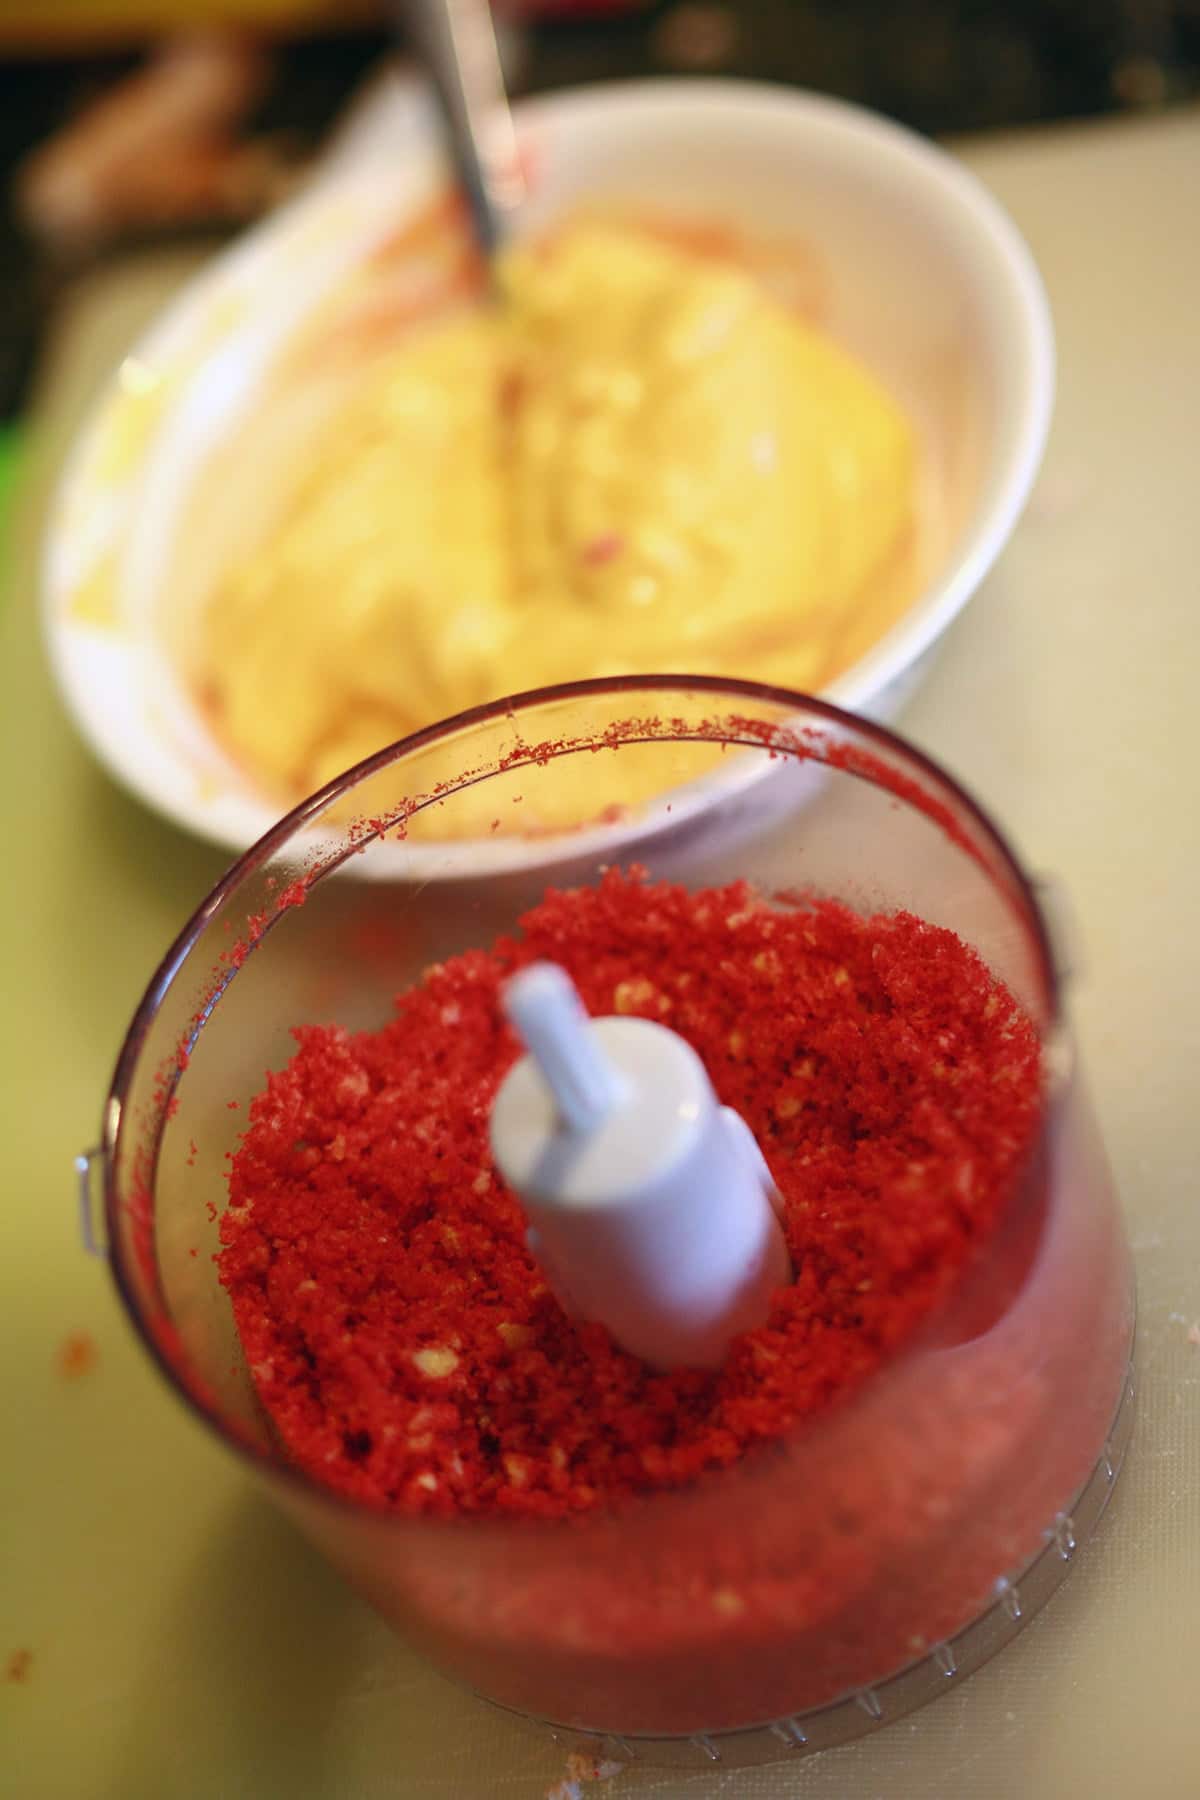 A bowl of Cheez Whiz nexy to a small foodprocessor with Hot Cheetos crumbs in it.